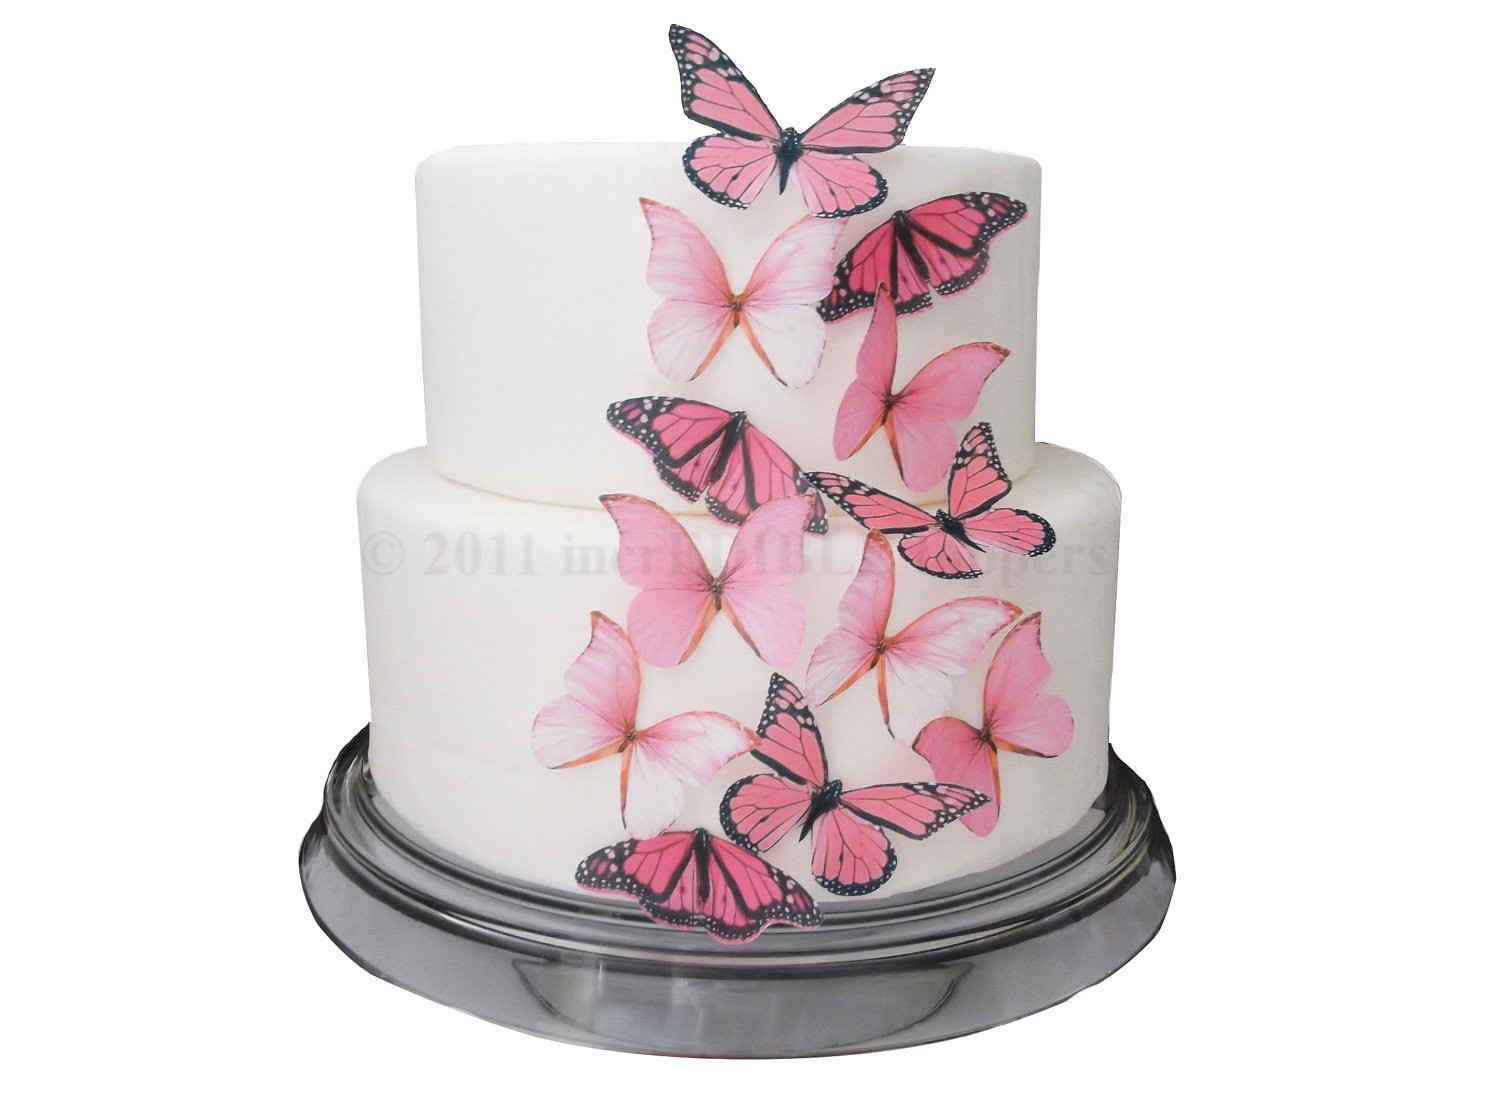 Edible Birthday Cake Decorations
 CAKE DECORATIONS Edible Butterflies 12 by